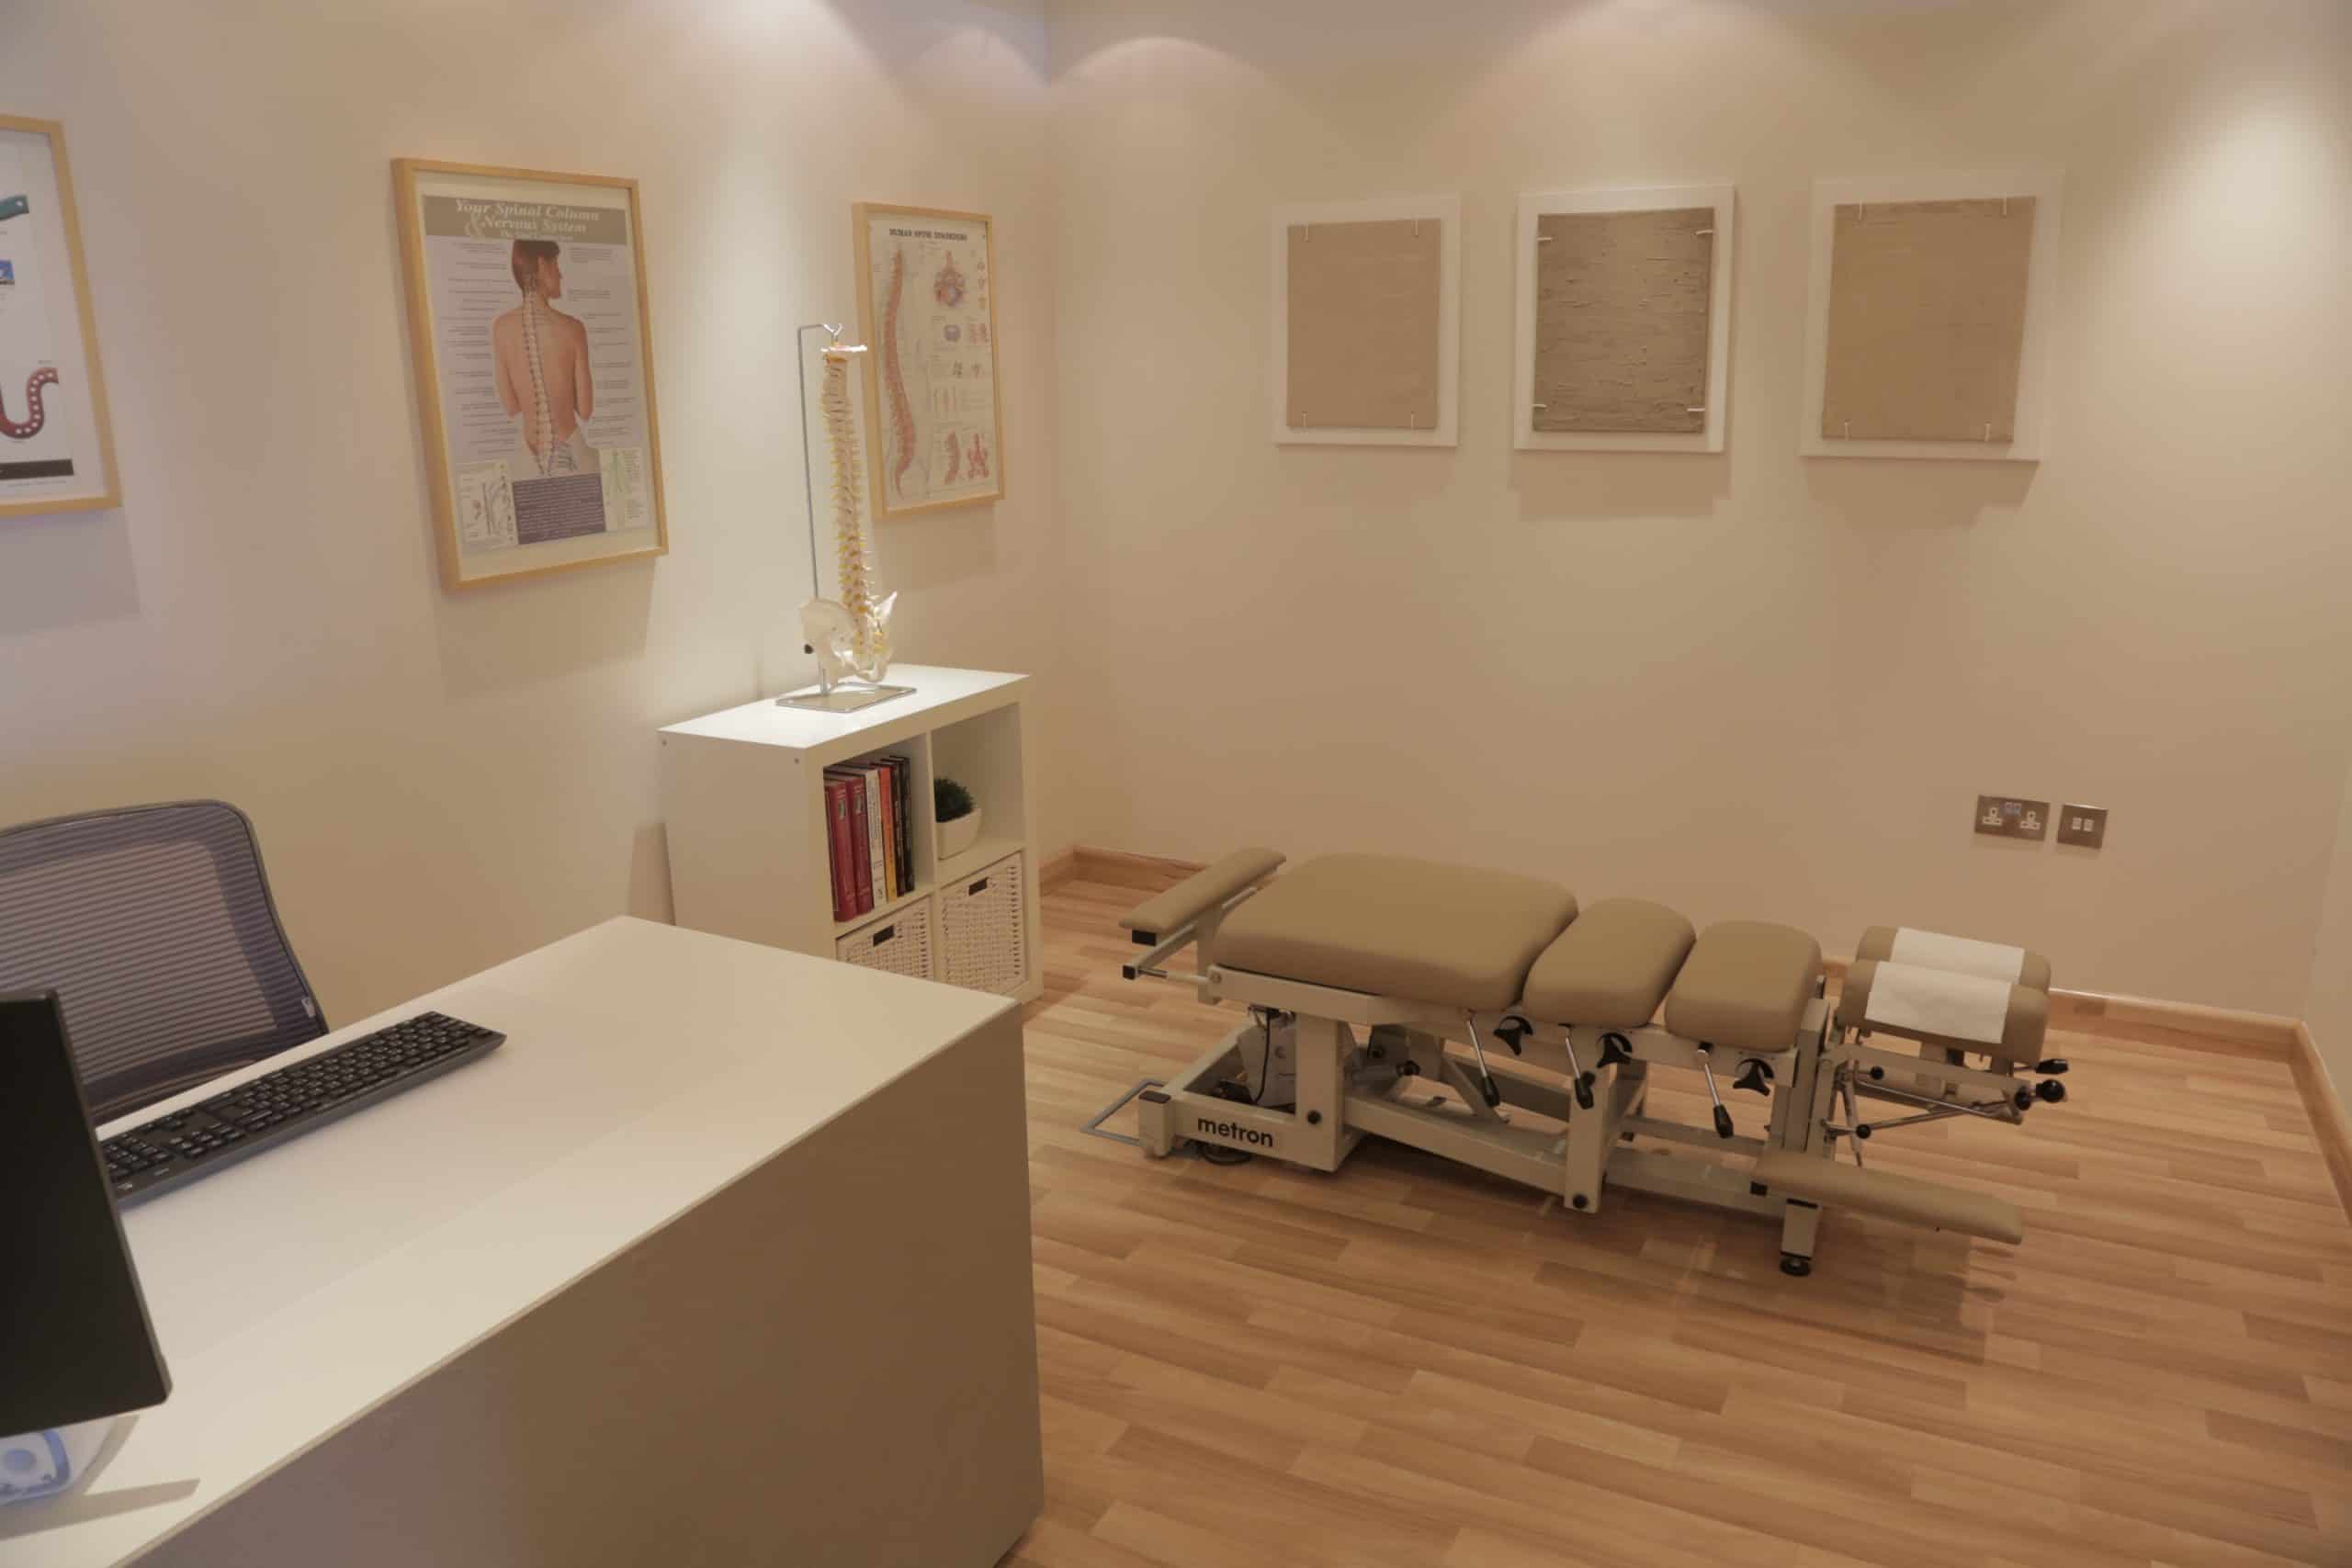 Pure Chiropractic Clinic Media City